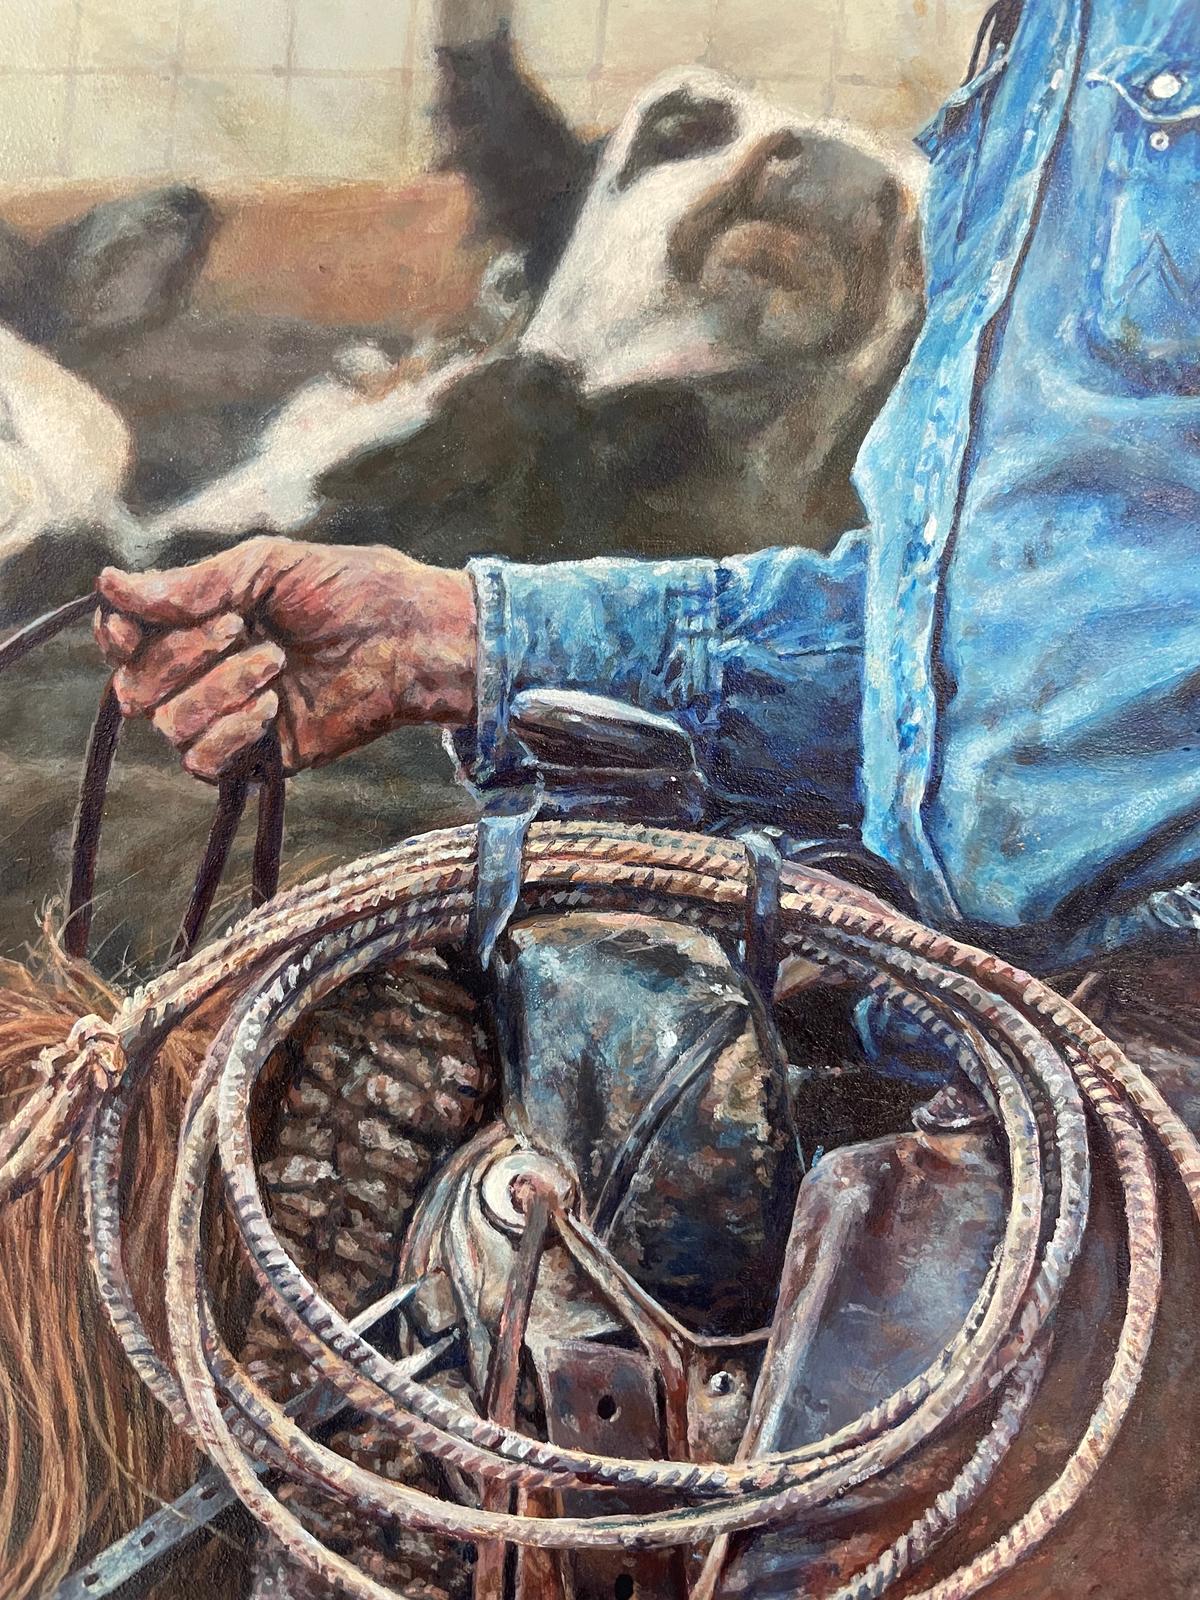 Detail of the background and cowboy's hand in Mia's painting, "Our Last Roundup." (Courtesy of Mia Huckman)